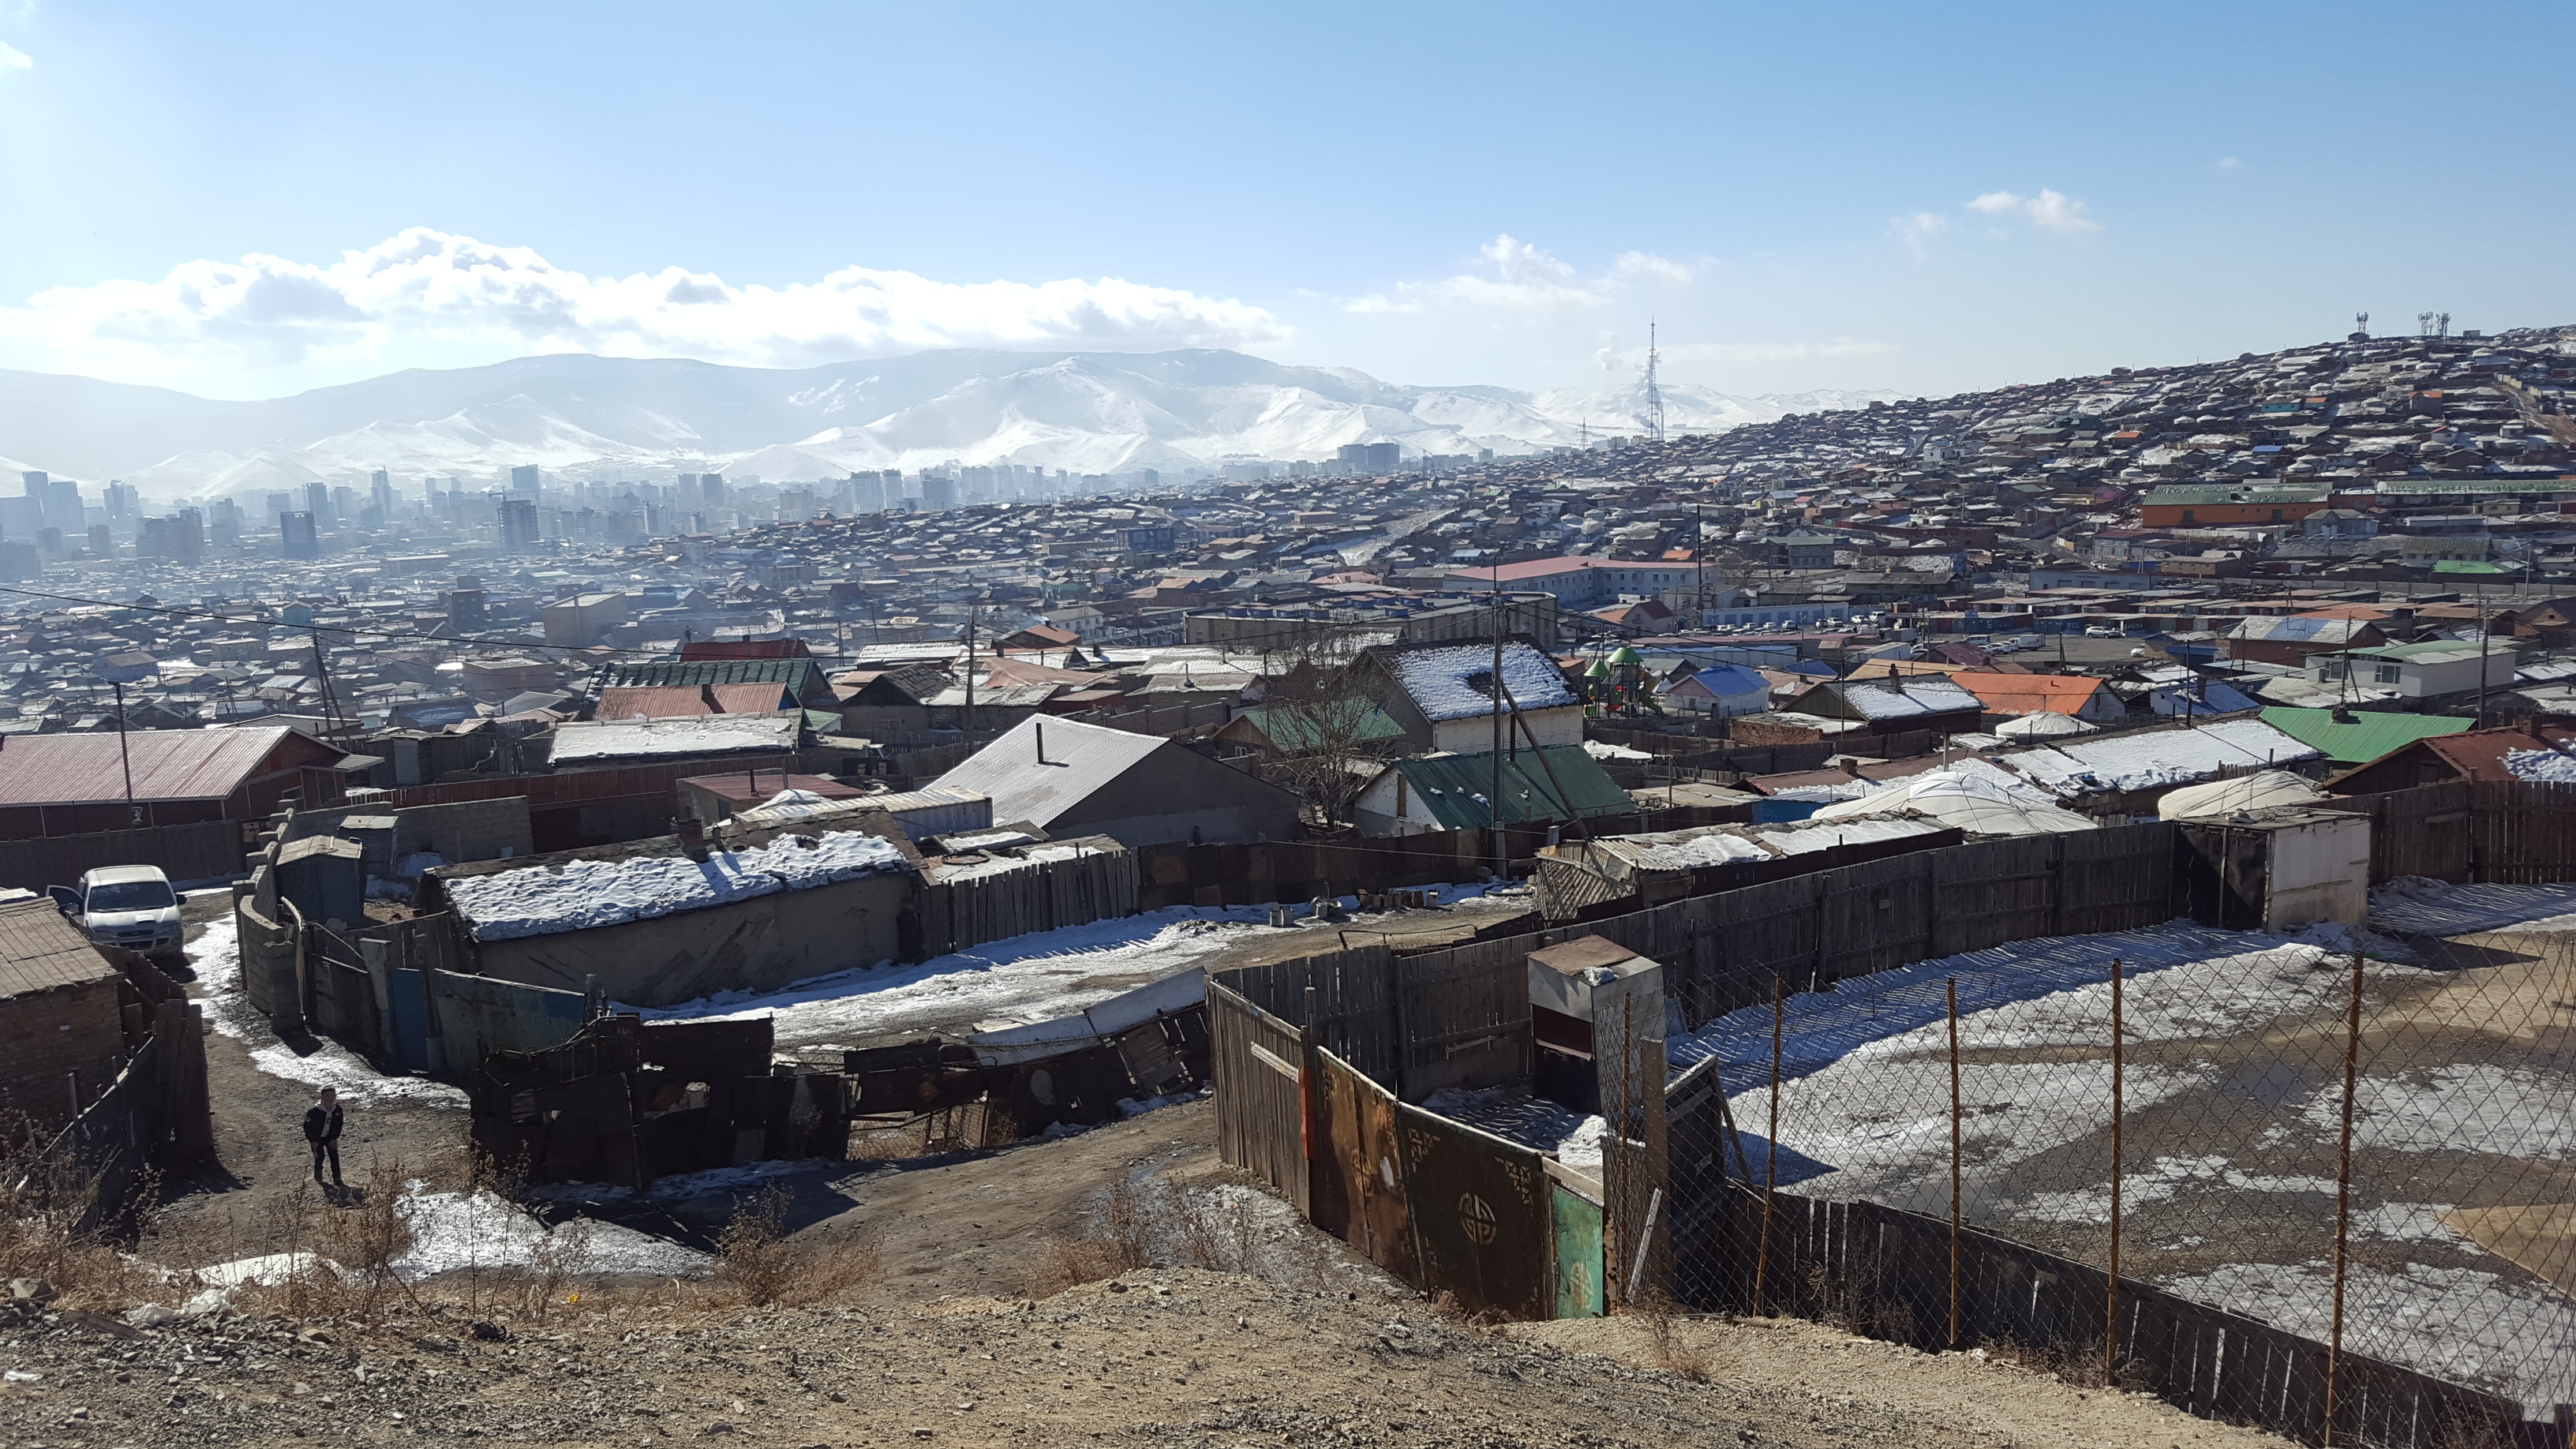 A view of the ger district in Ulaanbaatar, Mongolia’s capital.